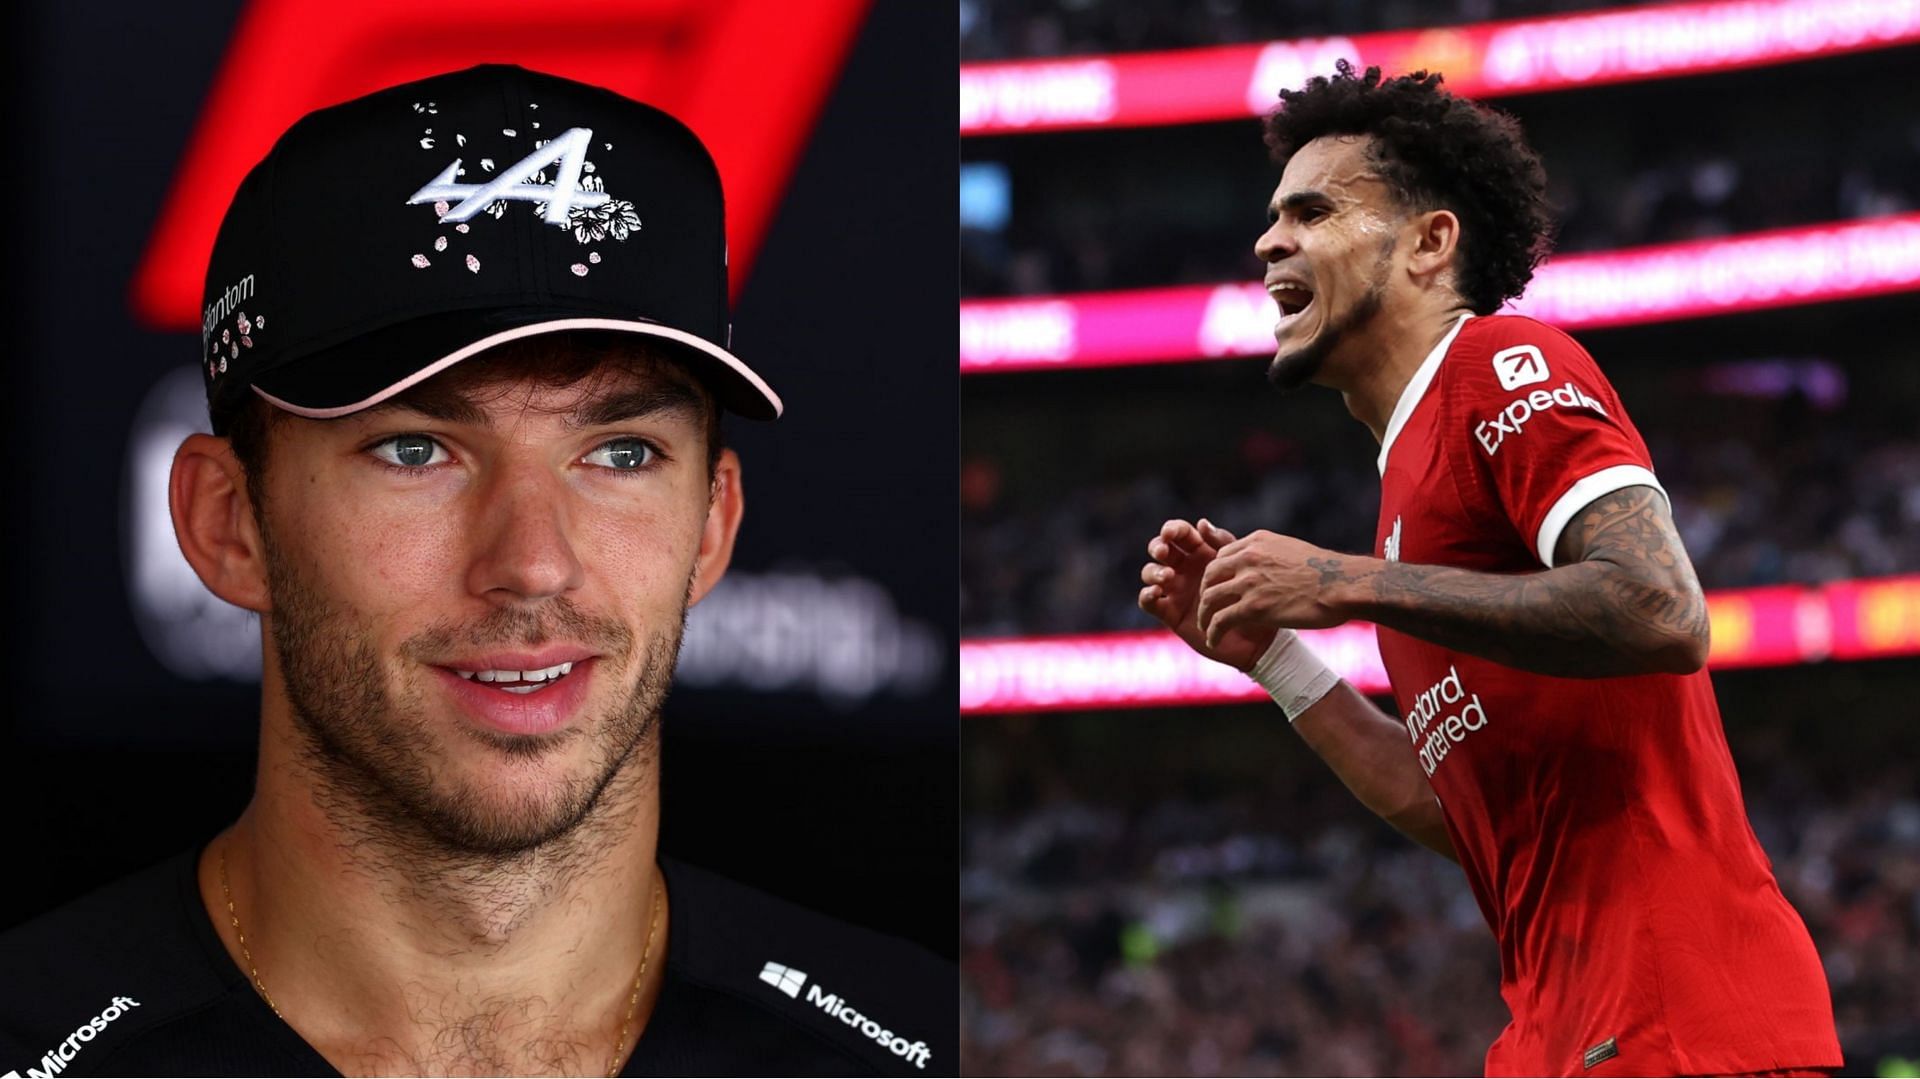 Pierre Gasly has compared the Liverpool vs Tottenham VAR controversy to Abu Dhabi 2021